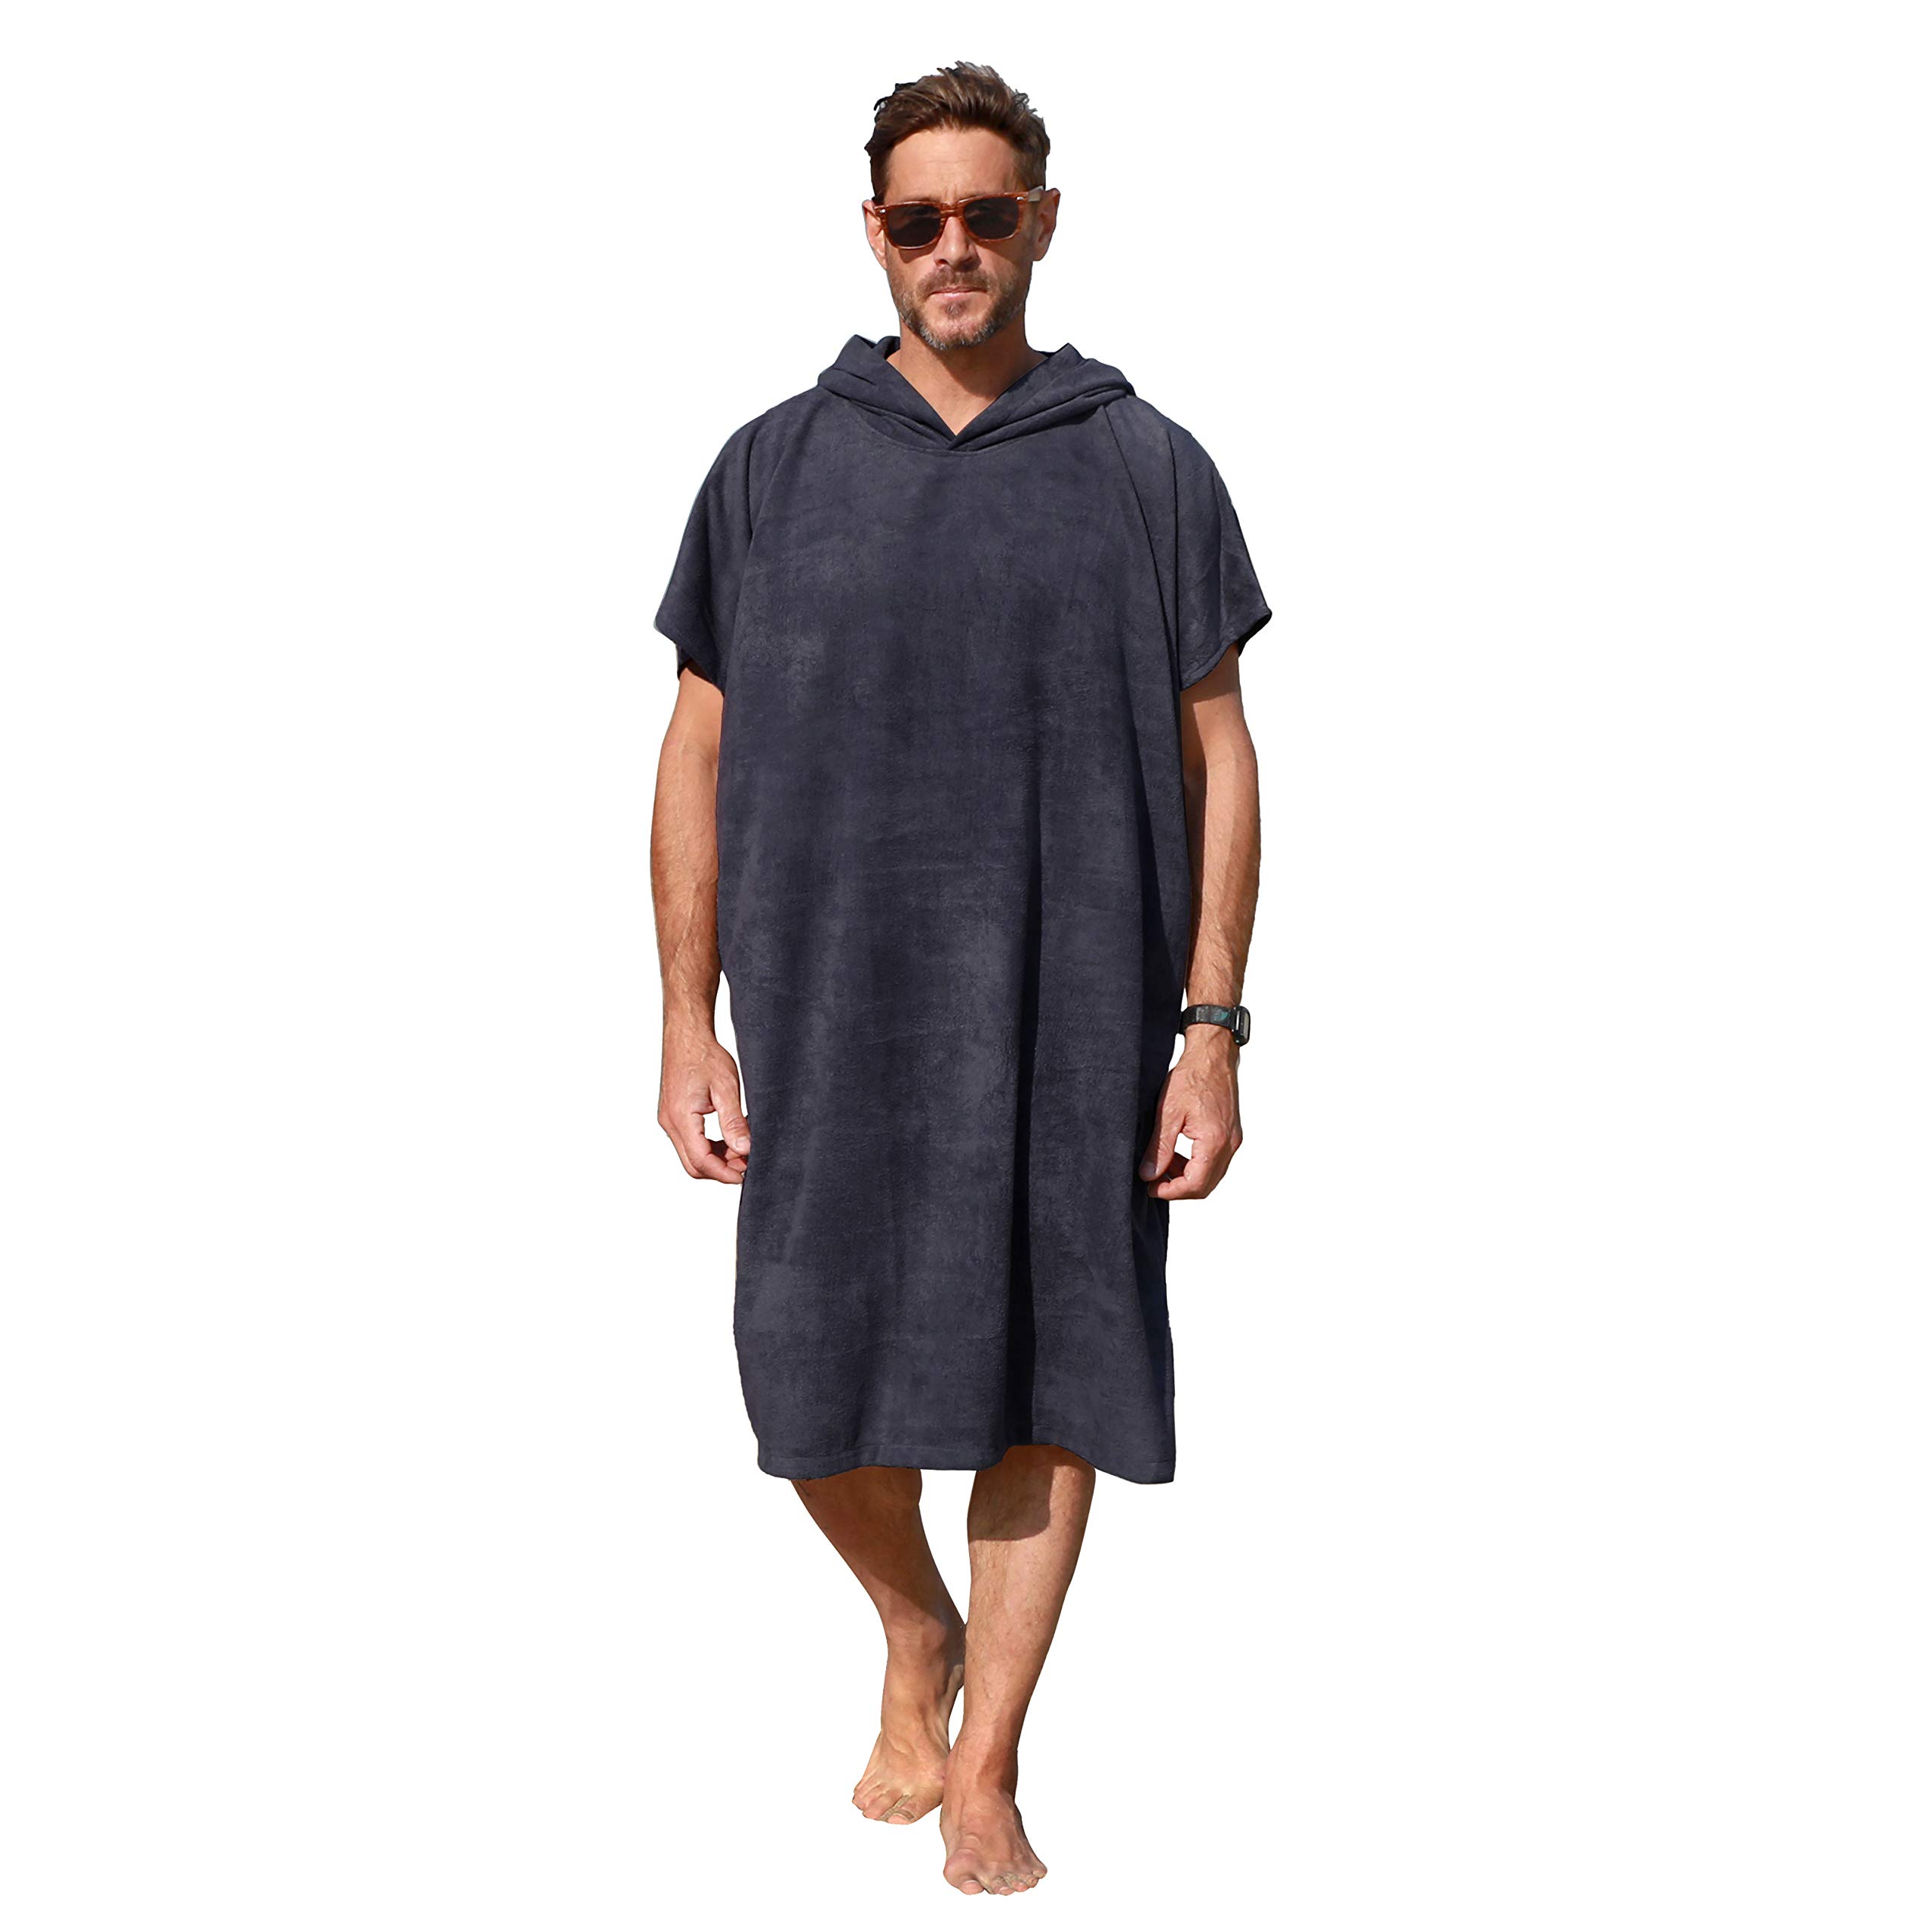 catalonia Surf Poncho changing Towel Robe for Adults Men Women, Hooded Wetsuit change Poncho for Surfing Swimming Bathing, Water